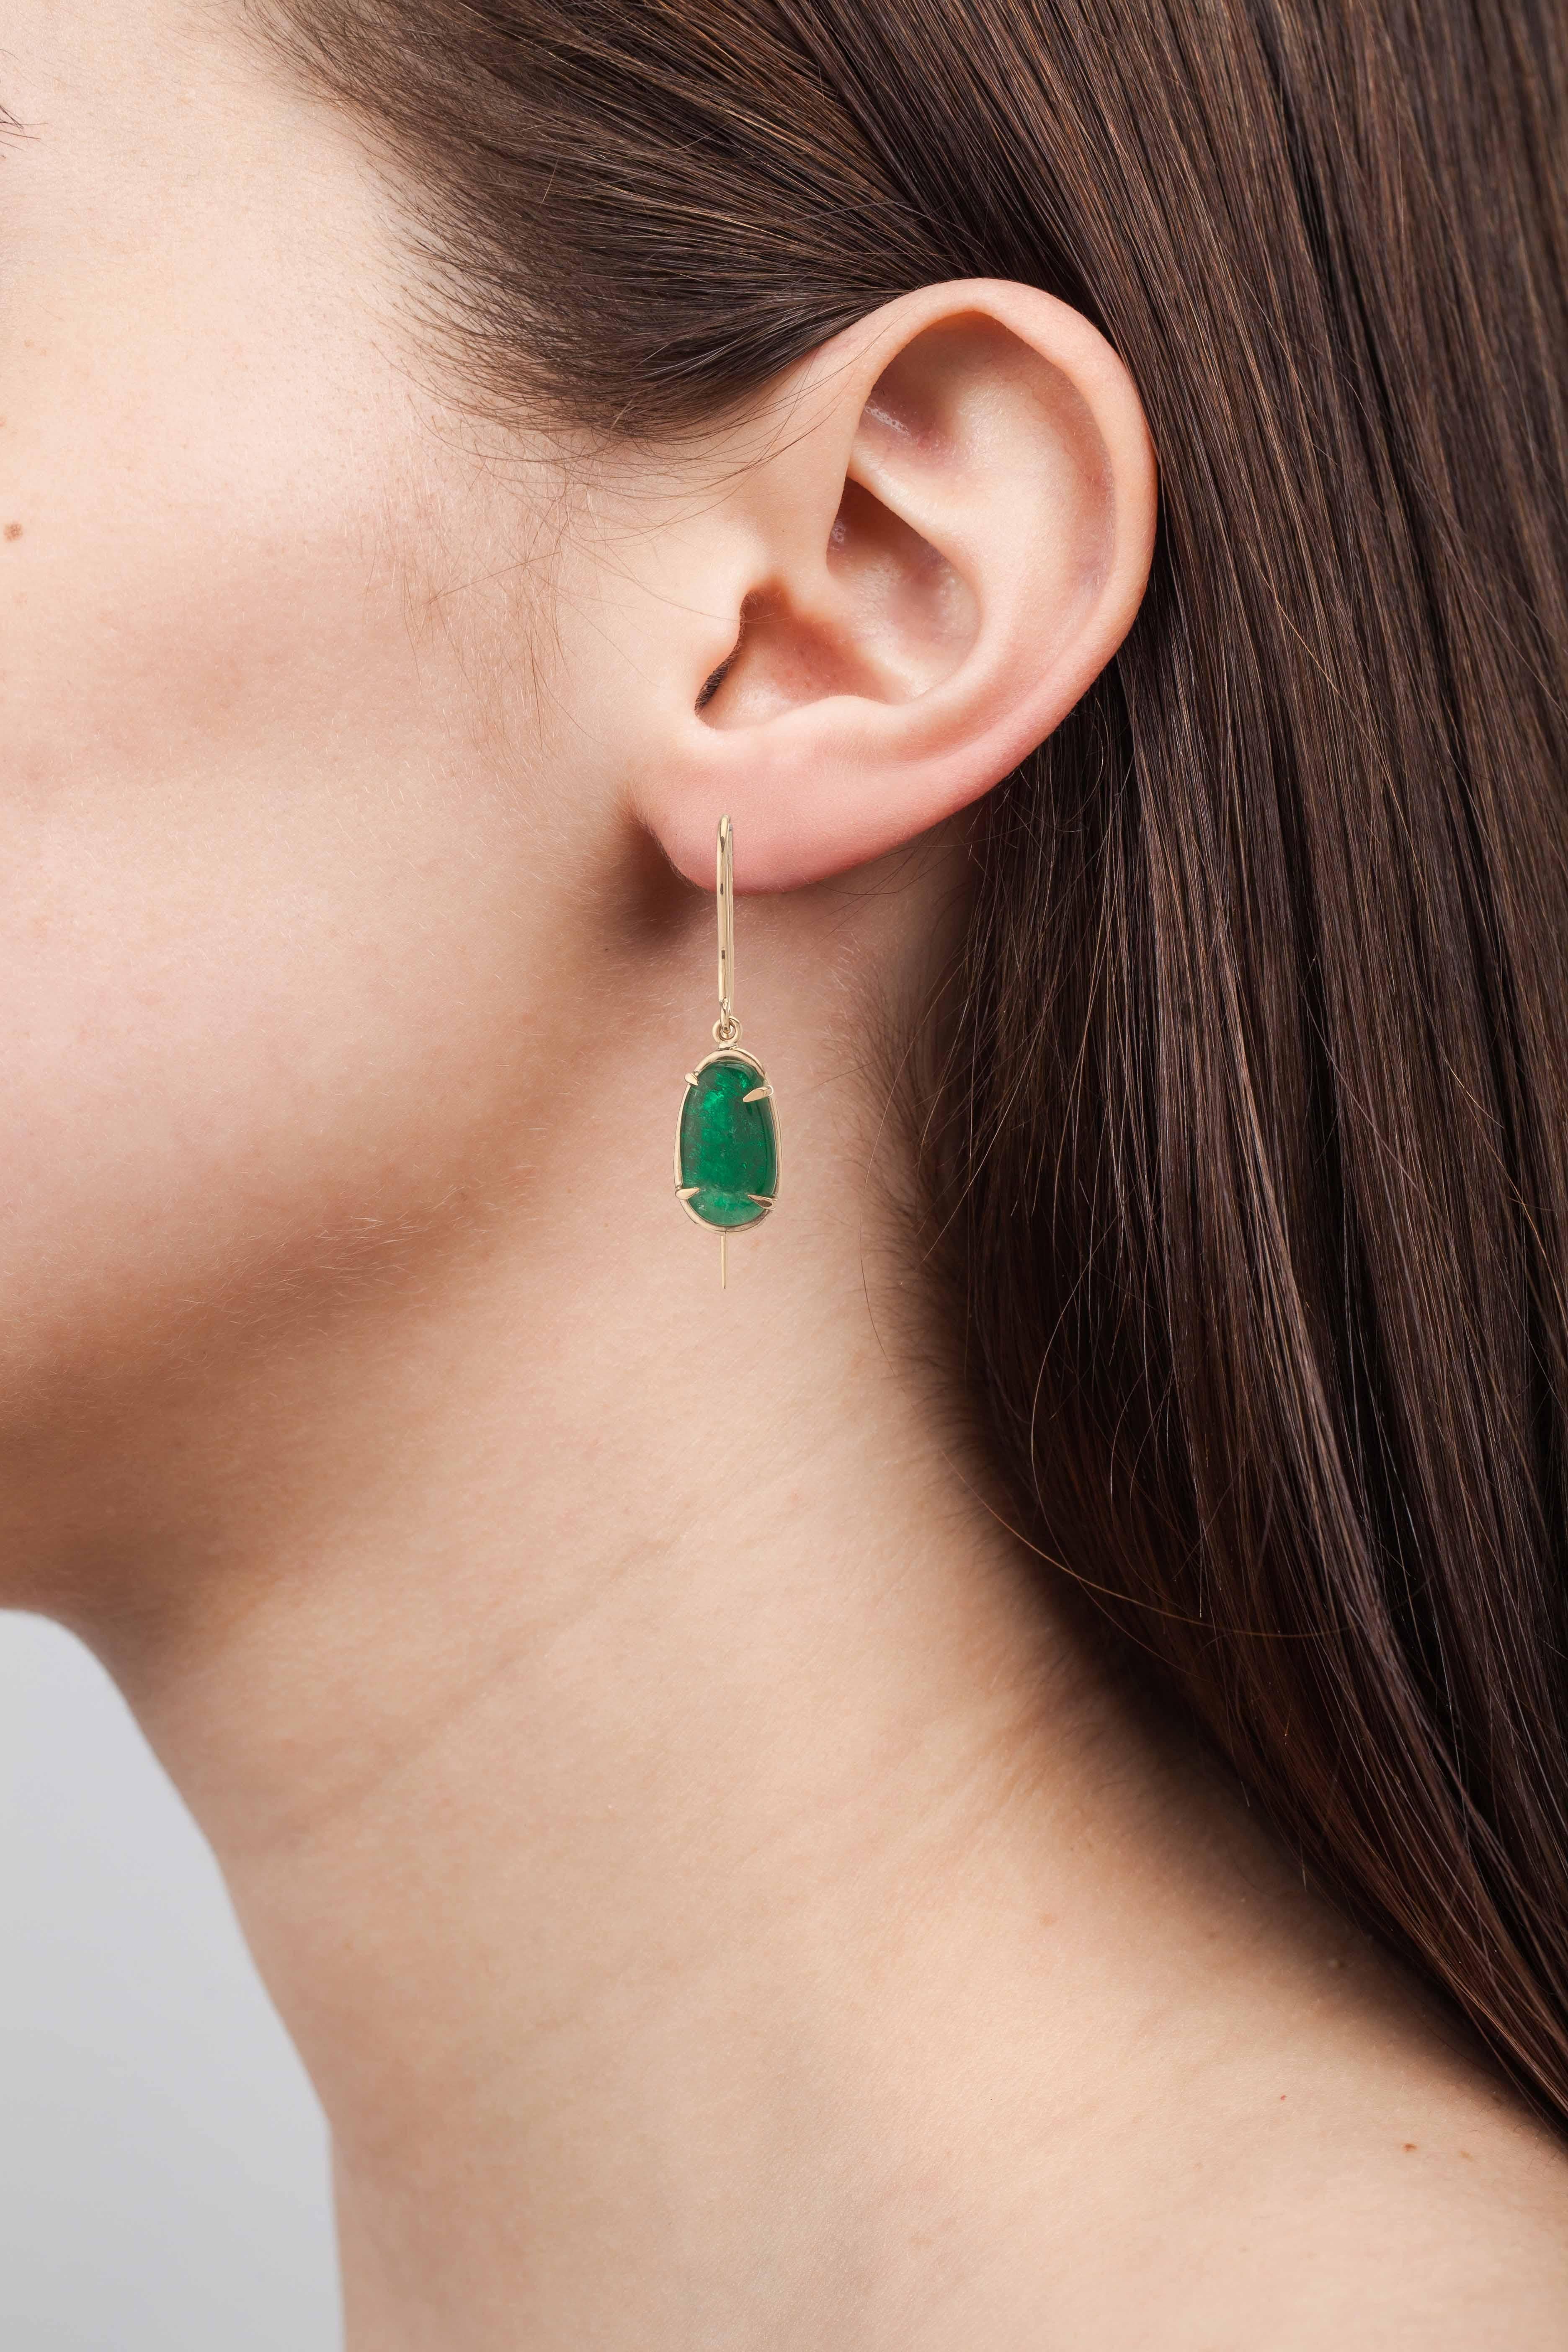 Classic style shepard hook earring in 18 Karat yellow gold with claw set Muzo Colombian emeralds weighing 6.72 carats.

Muzo Emerald Colombia Heritage Chakana Earrings set with 6.72 carats Emerald 

Chakana takes its name from the sacred and